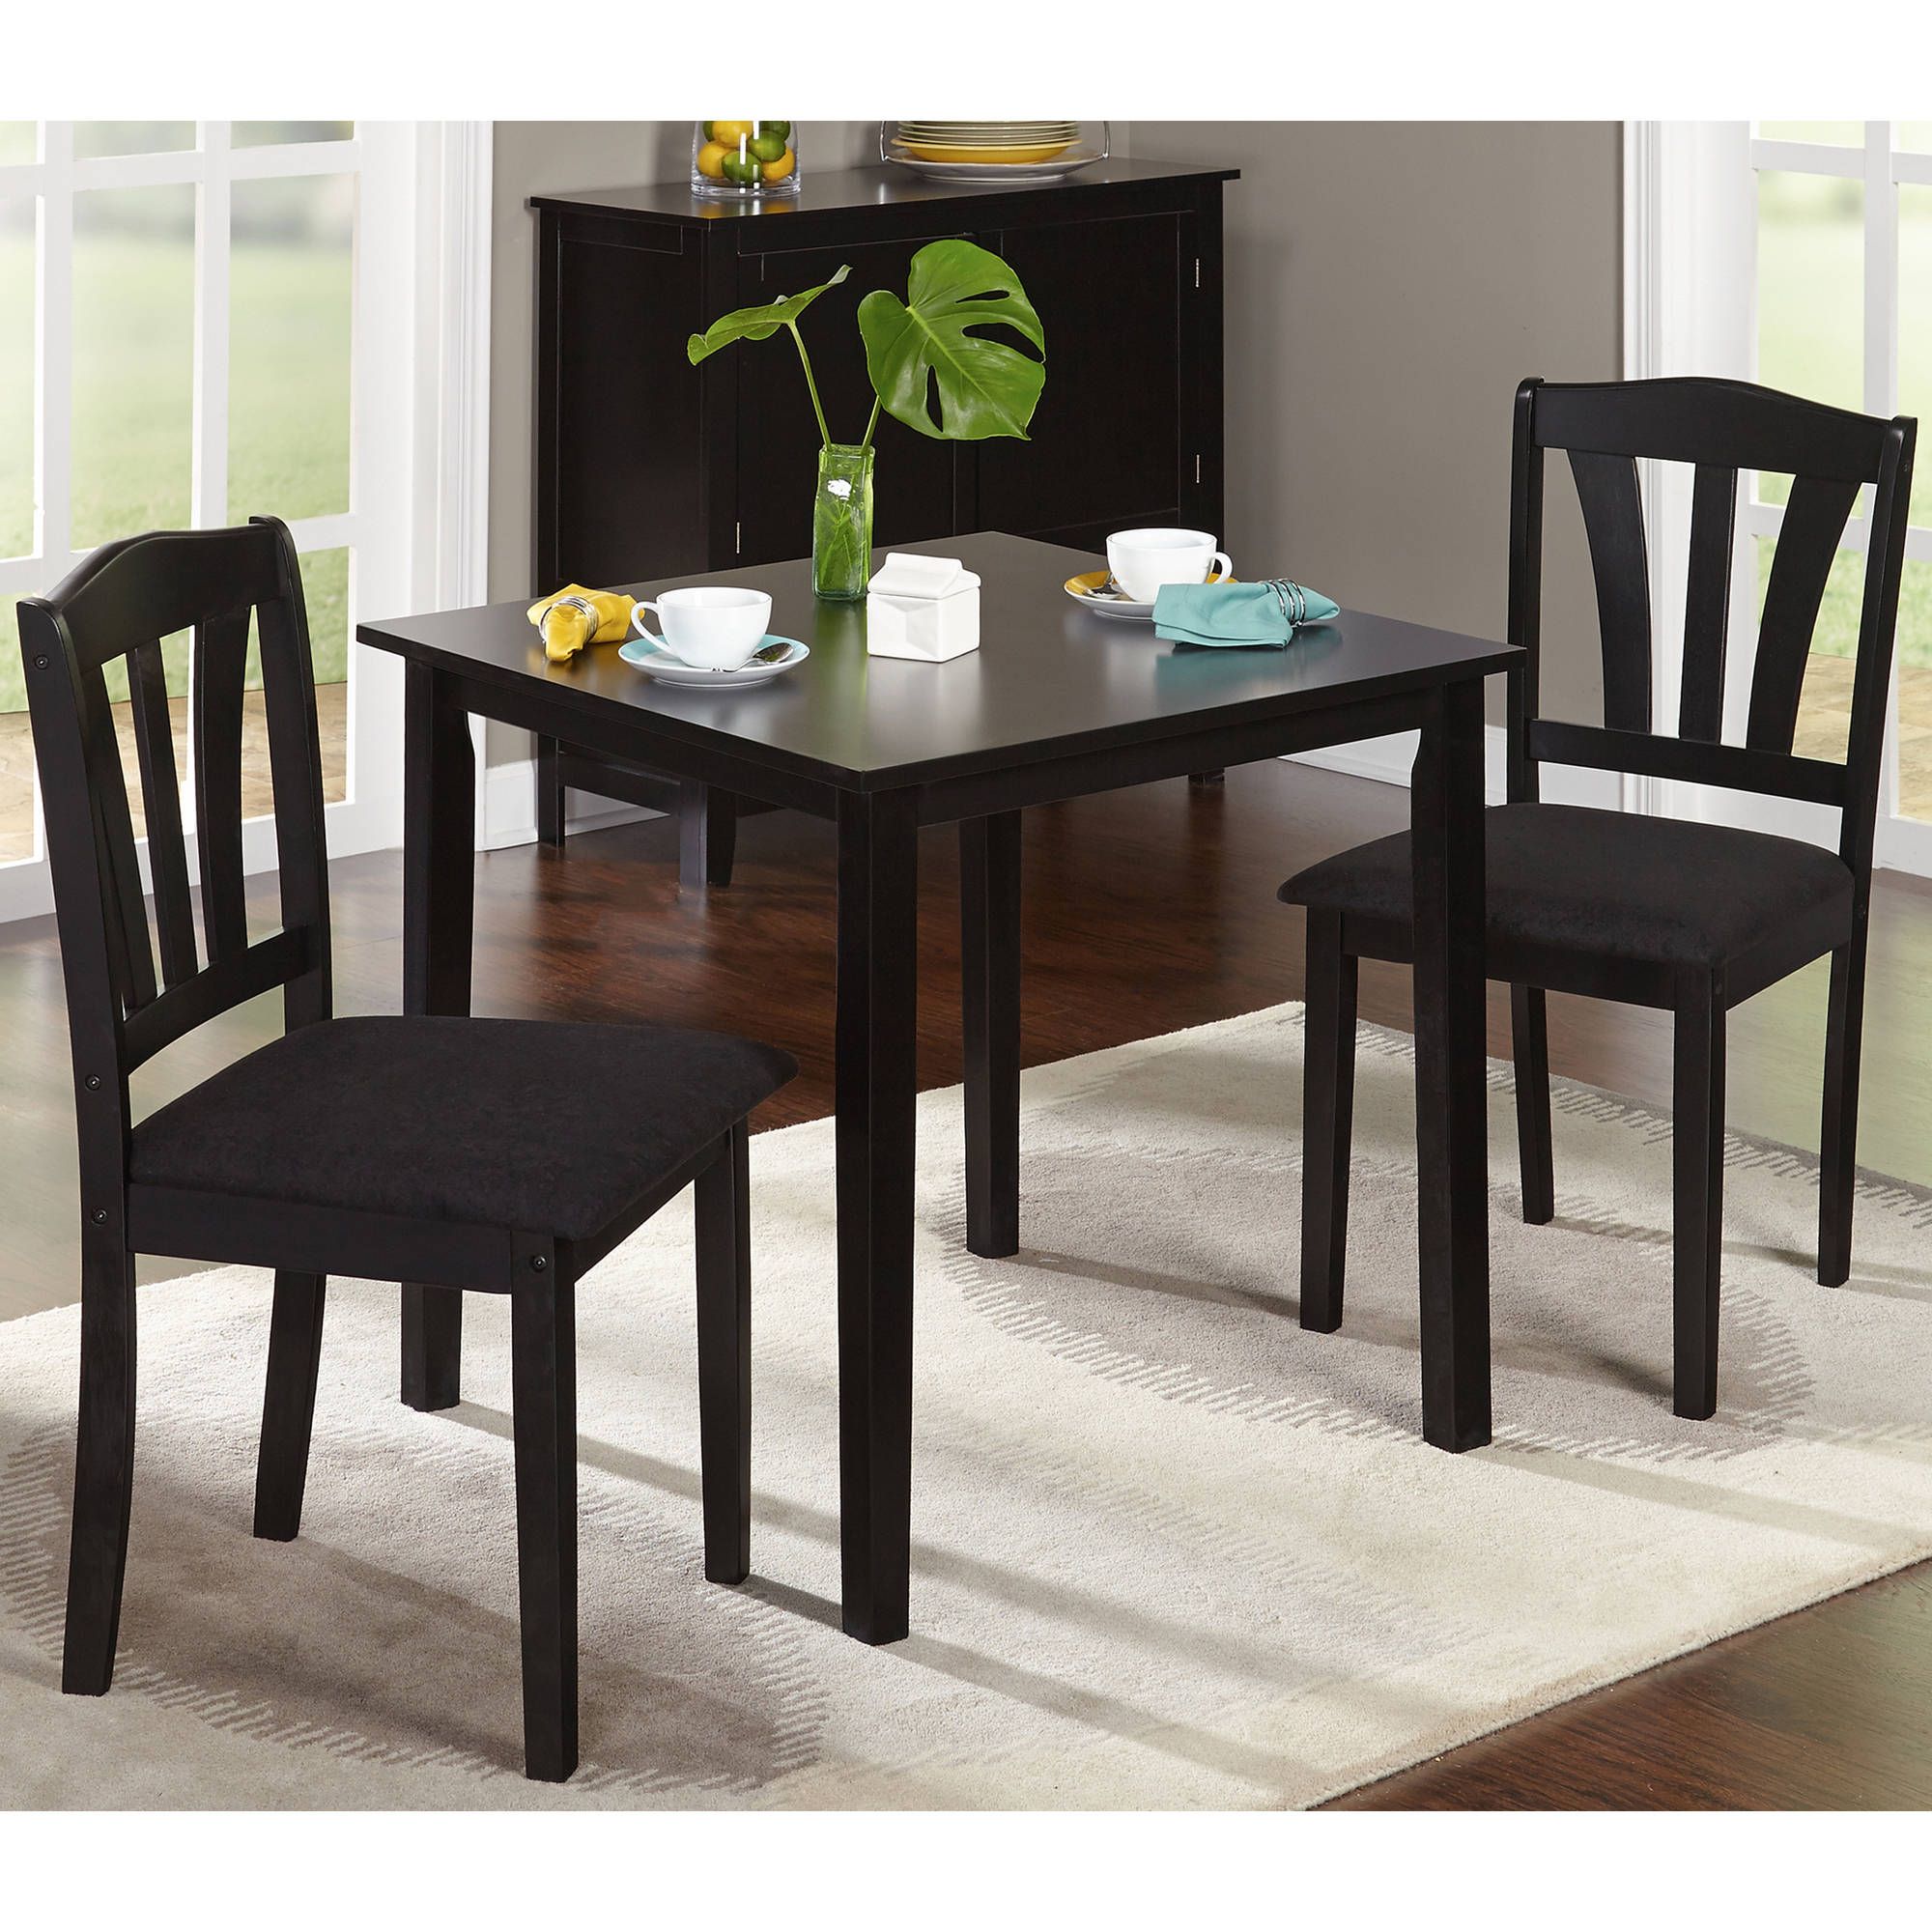 Most Popular Metropolitan 3 Piece Dining Set, Multiple Finishes Throughout 3 Piece Breakfast Dining Sets (View 2 of 20)